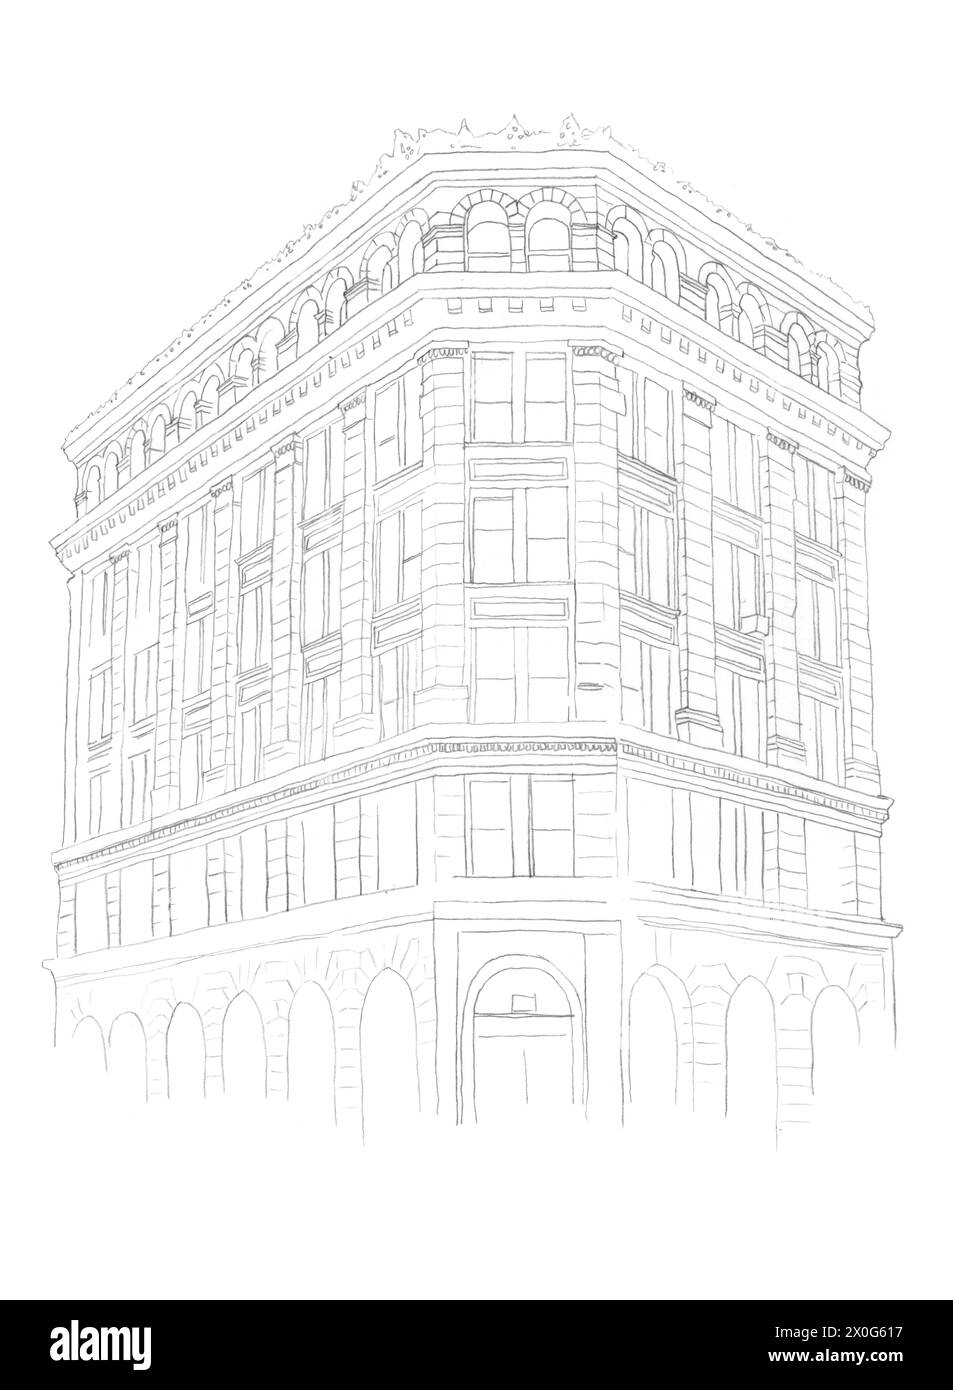 Architectural pencil drawing sketch of the Germania Bank building in New York, USA Stock Photo